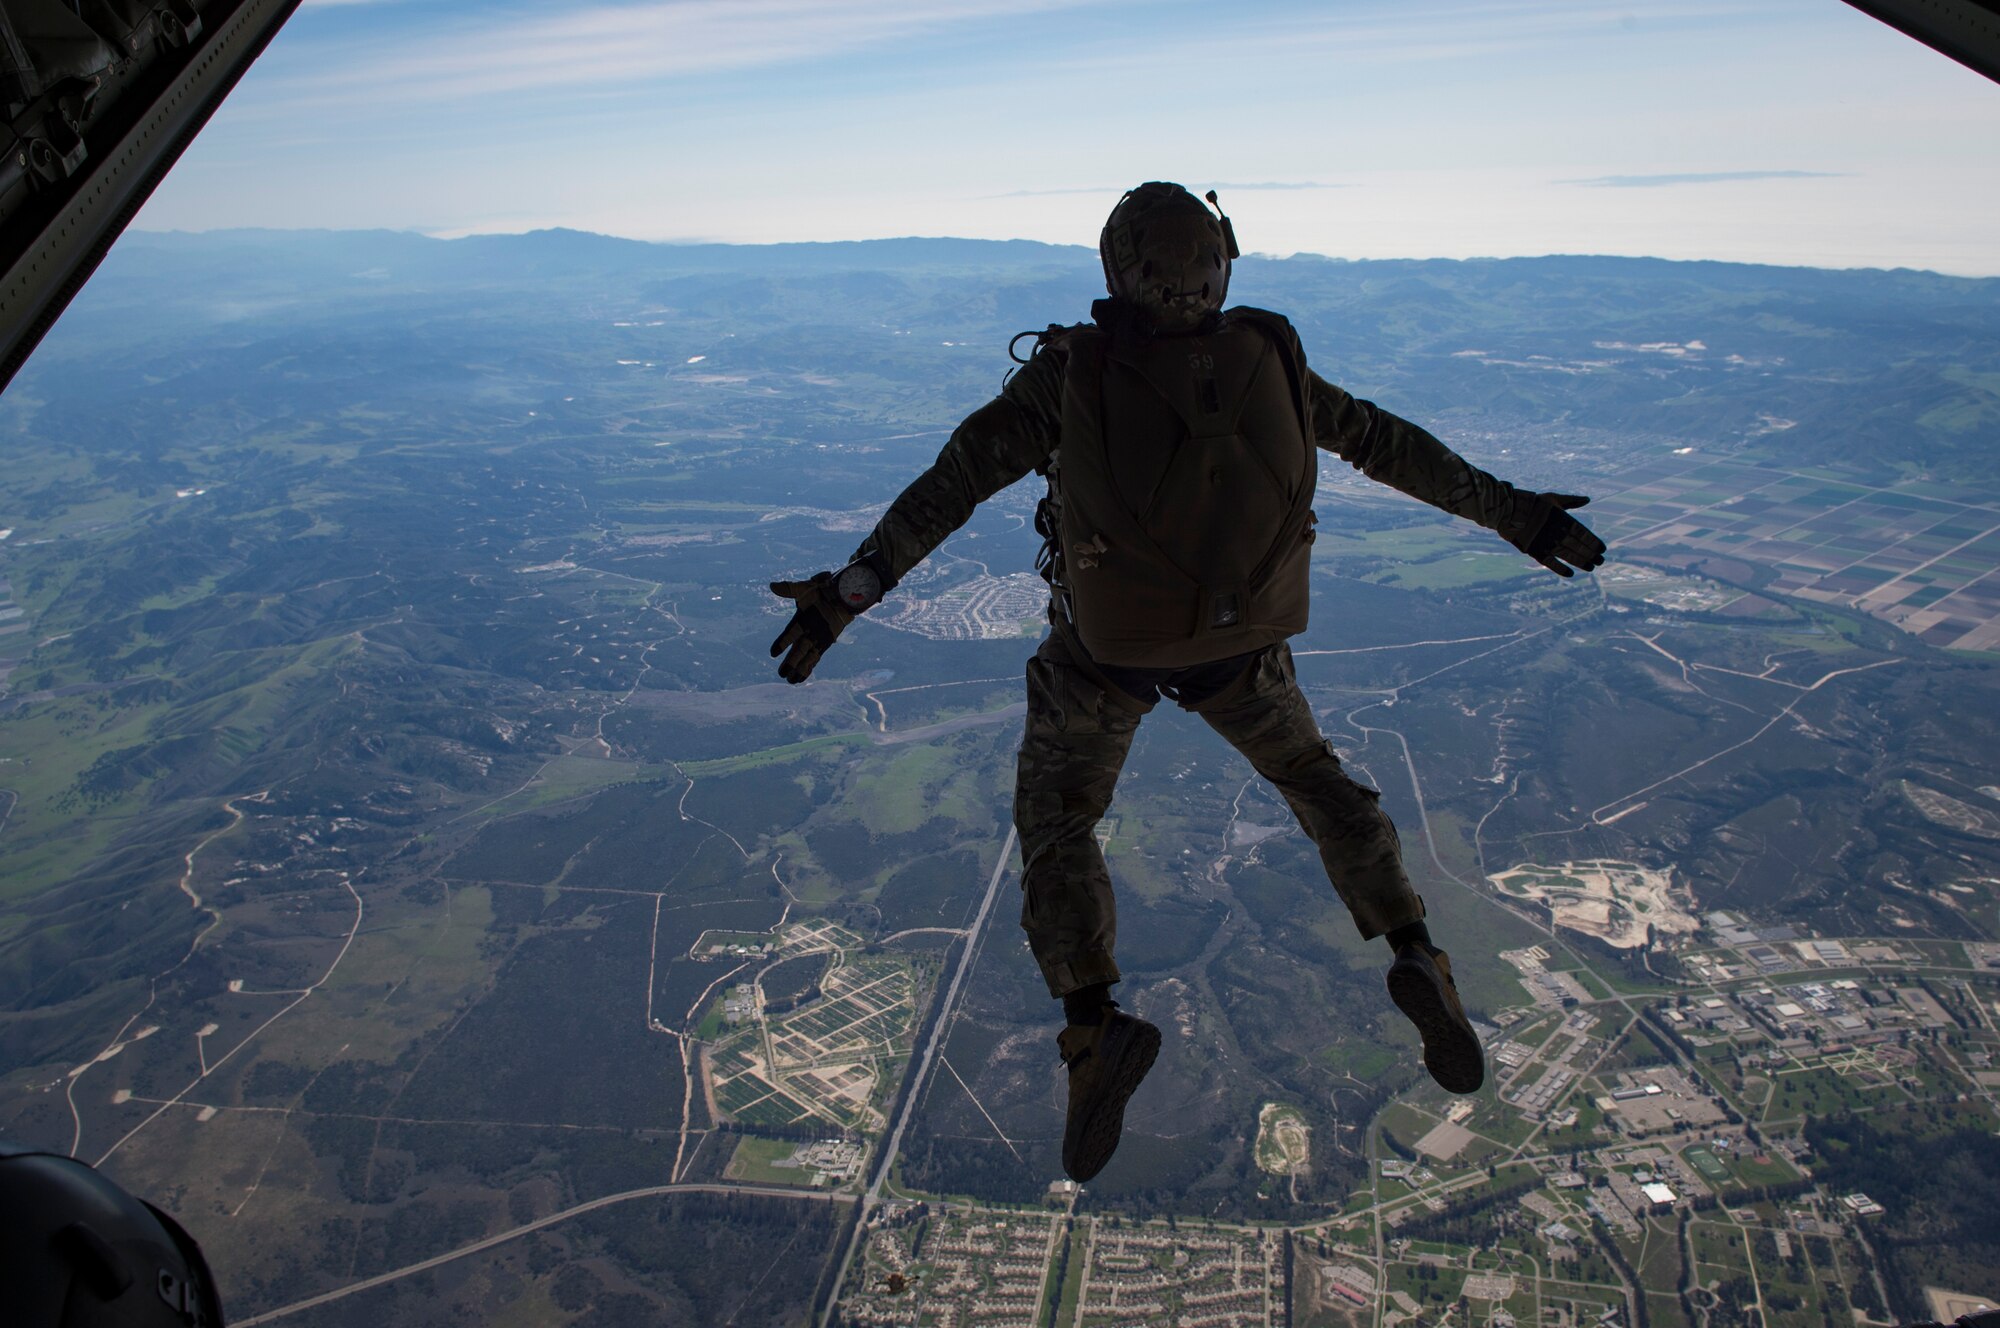 A pararescueman from the 58th Rescue Squadron, Nellis Air Force Base, Nev., descends onto a drop zone during Tiger Rescue IV, March 30, 2018, at Vandenberg Air Force Base, Calif. The four-day exercise challenged Airmen from multiple rescue squadrons to bring the capabilities of the personnel recovery triad together to successfully complete rescue missions and maintain proficiency. The three branches of the personnel recovery triad are the HC-130J Combat King II, HH-60G Pave Hawk and the guardian angel weapons system or pararescuemen. (U.S. Air Force photo by Senior Airman Janiqua P. Robinson)